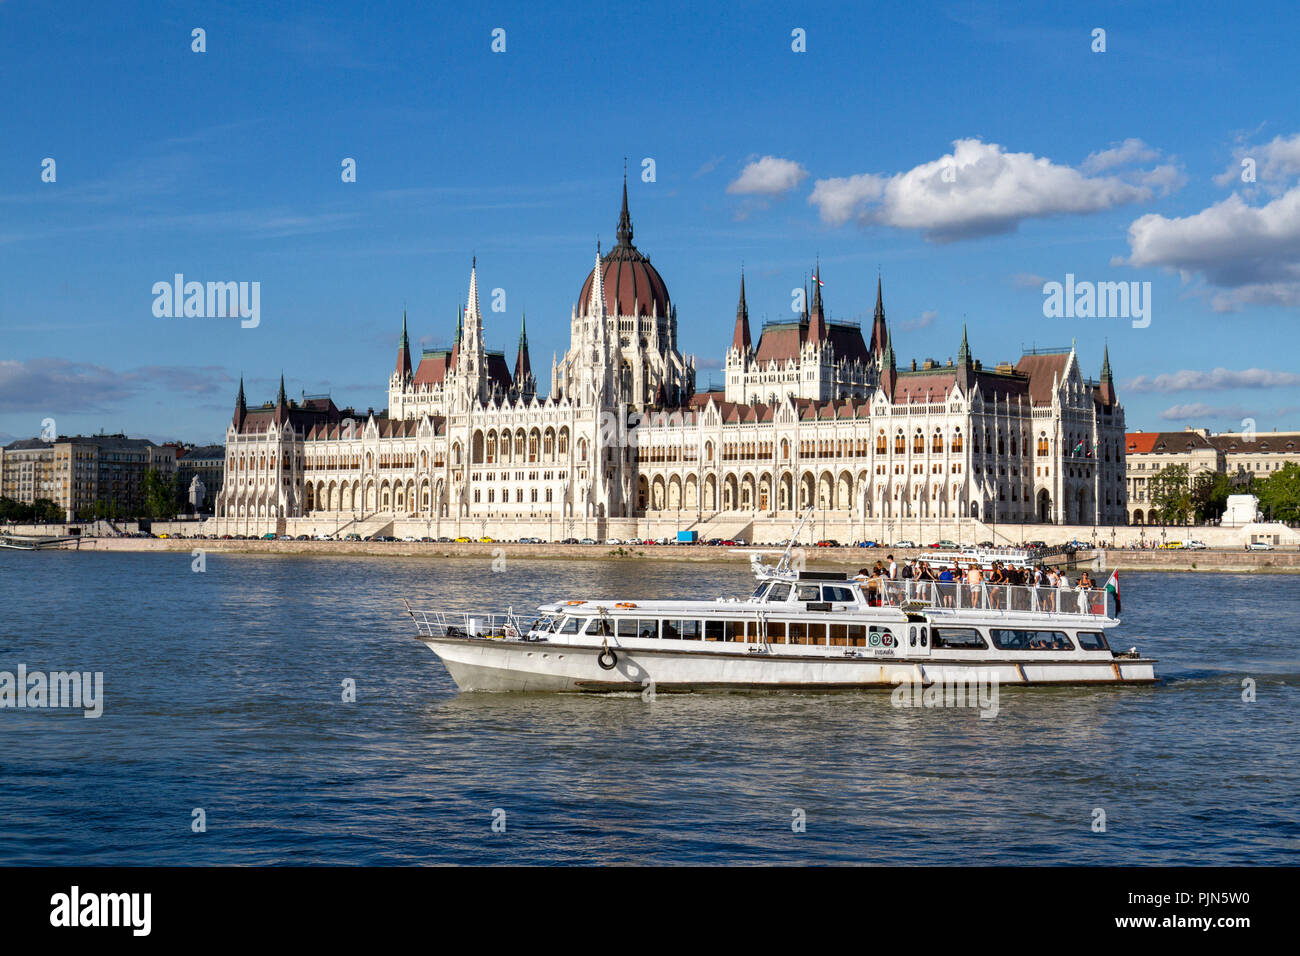 The Hungarian Parliament Building (Országház) in Budapest, Hungary viewed from the western (Buda) side of the River Danube. Stock Photo